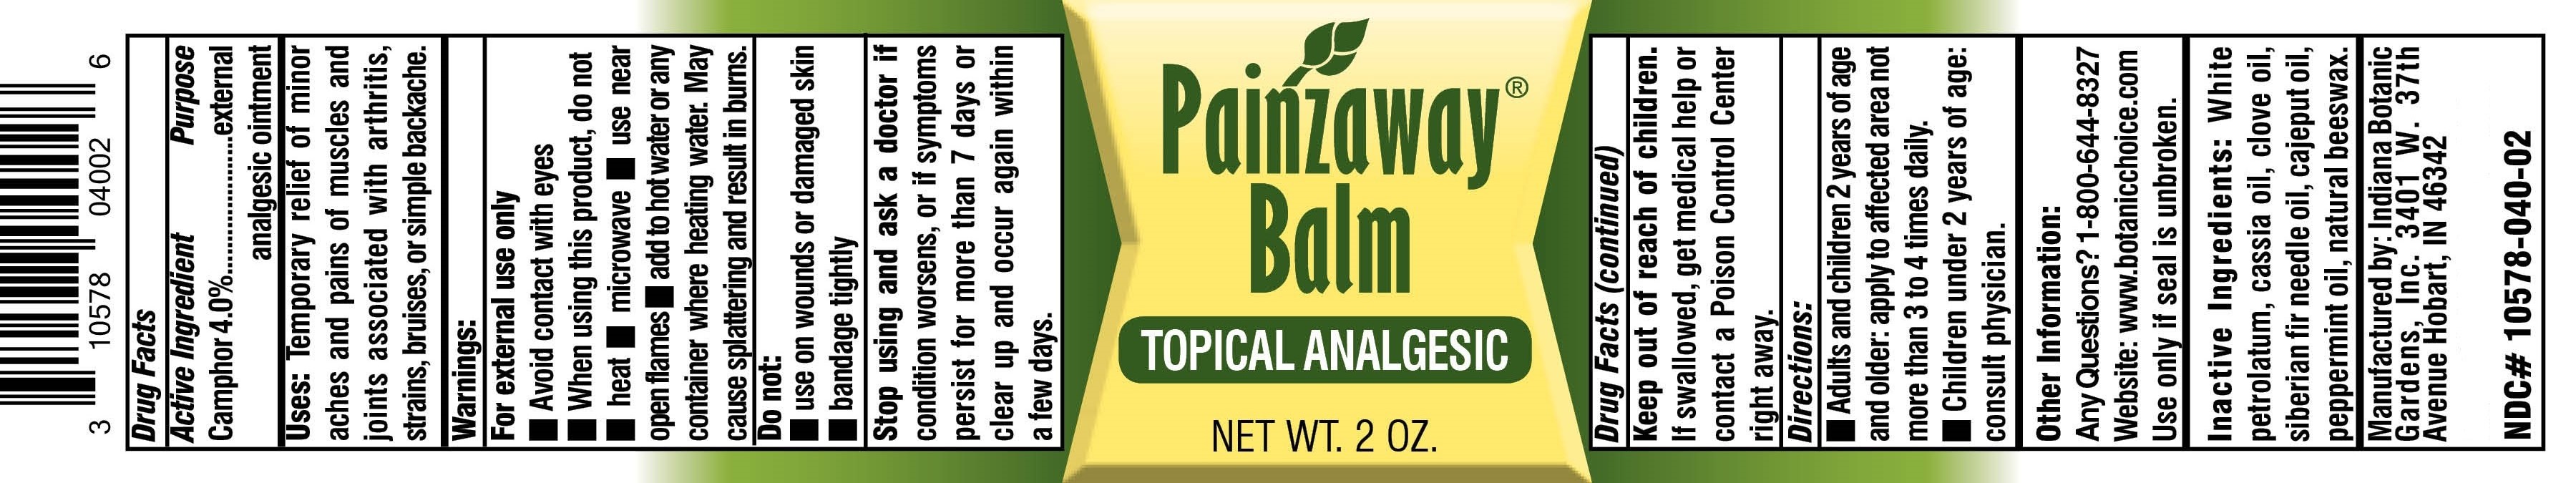 Painzaway Balm | Camphor Ointment while Breastfeeding